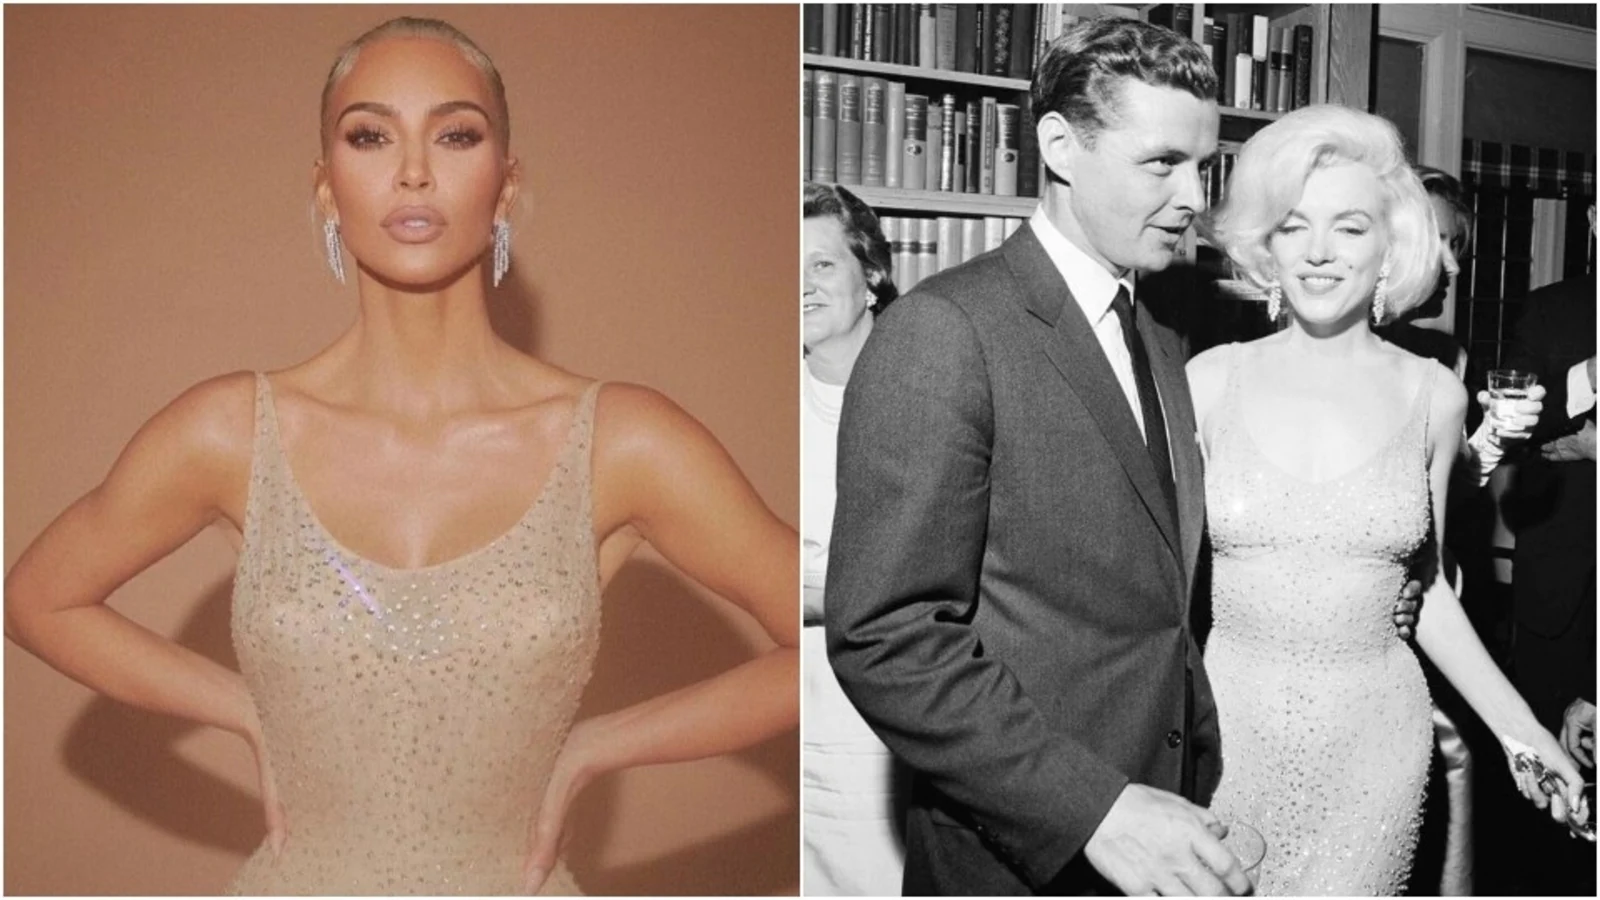 Kim Kardashian lost 7kg in 3 weeks to fit in Marilyn Monroe’s USD 5 million gown for Met Gala: It was this or nothing